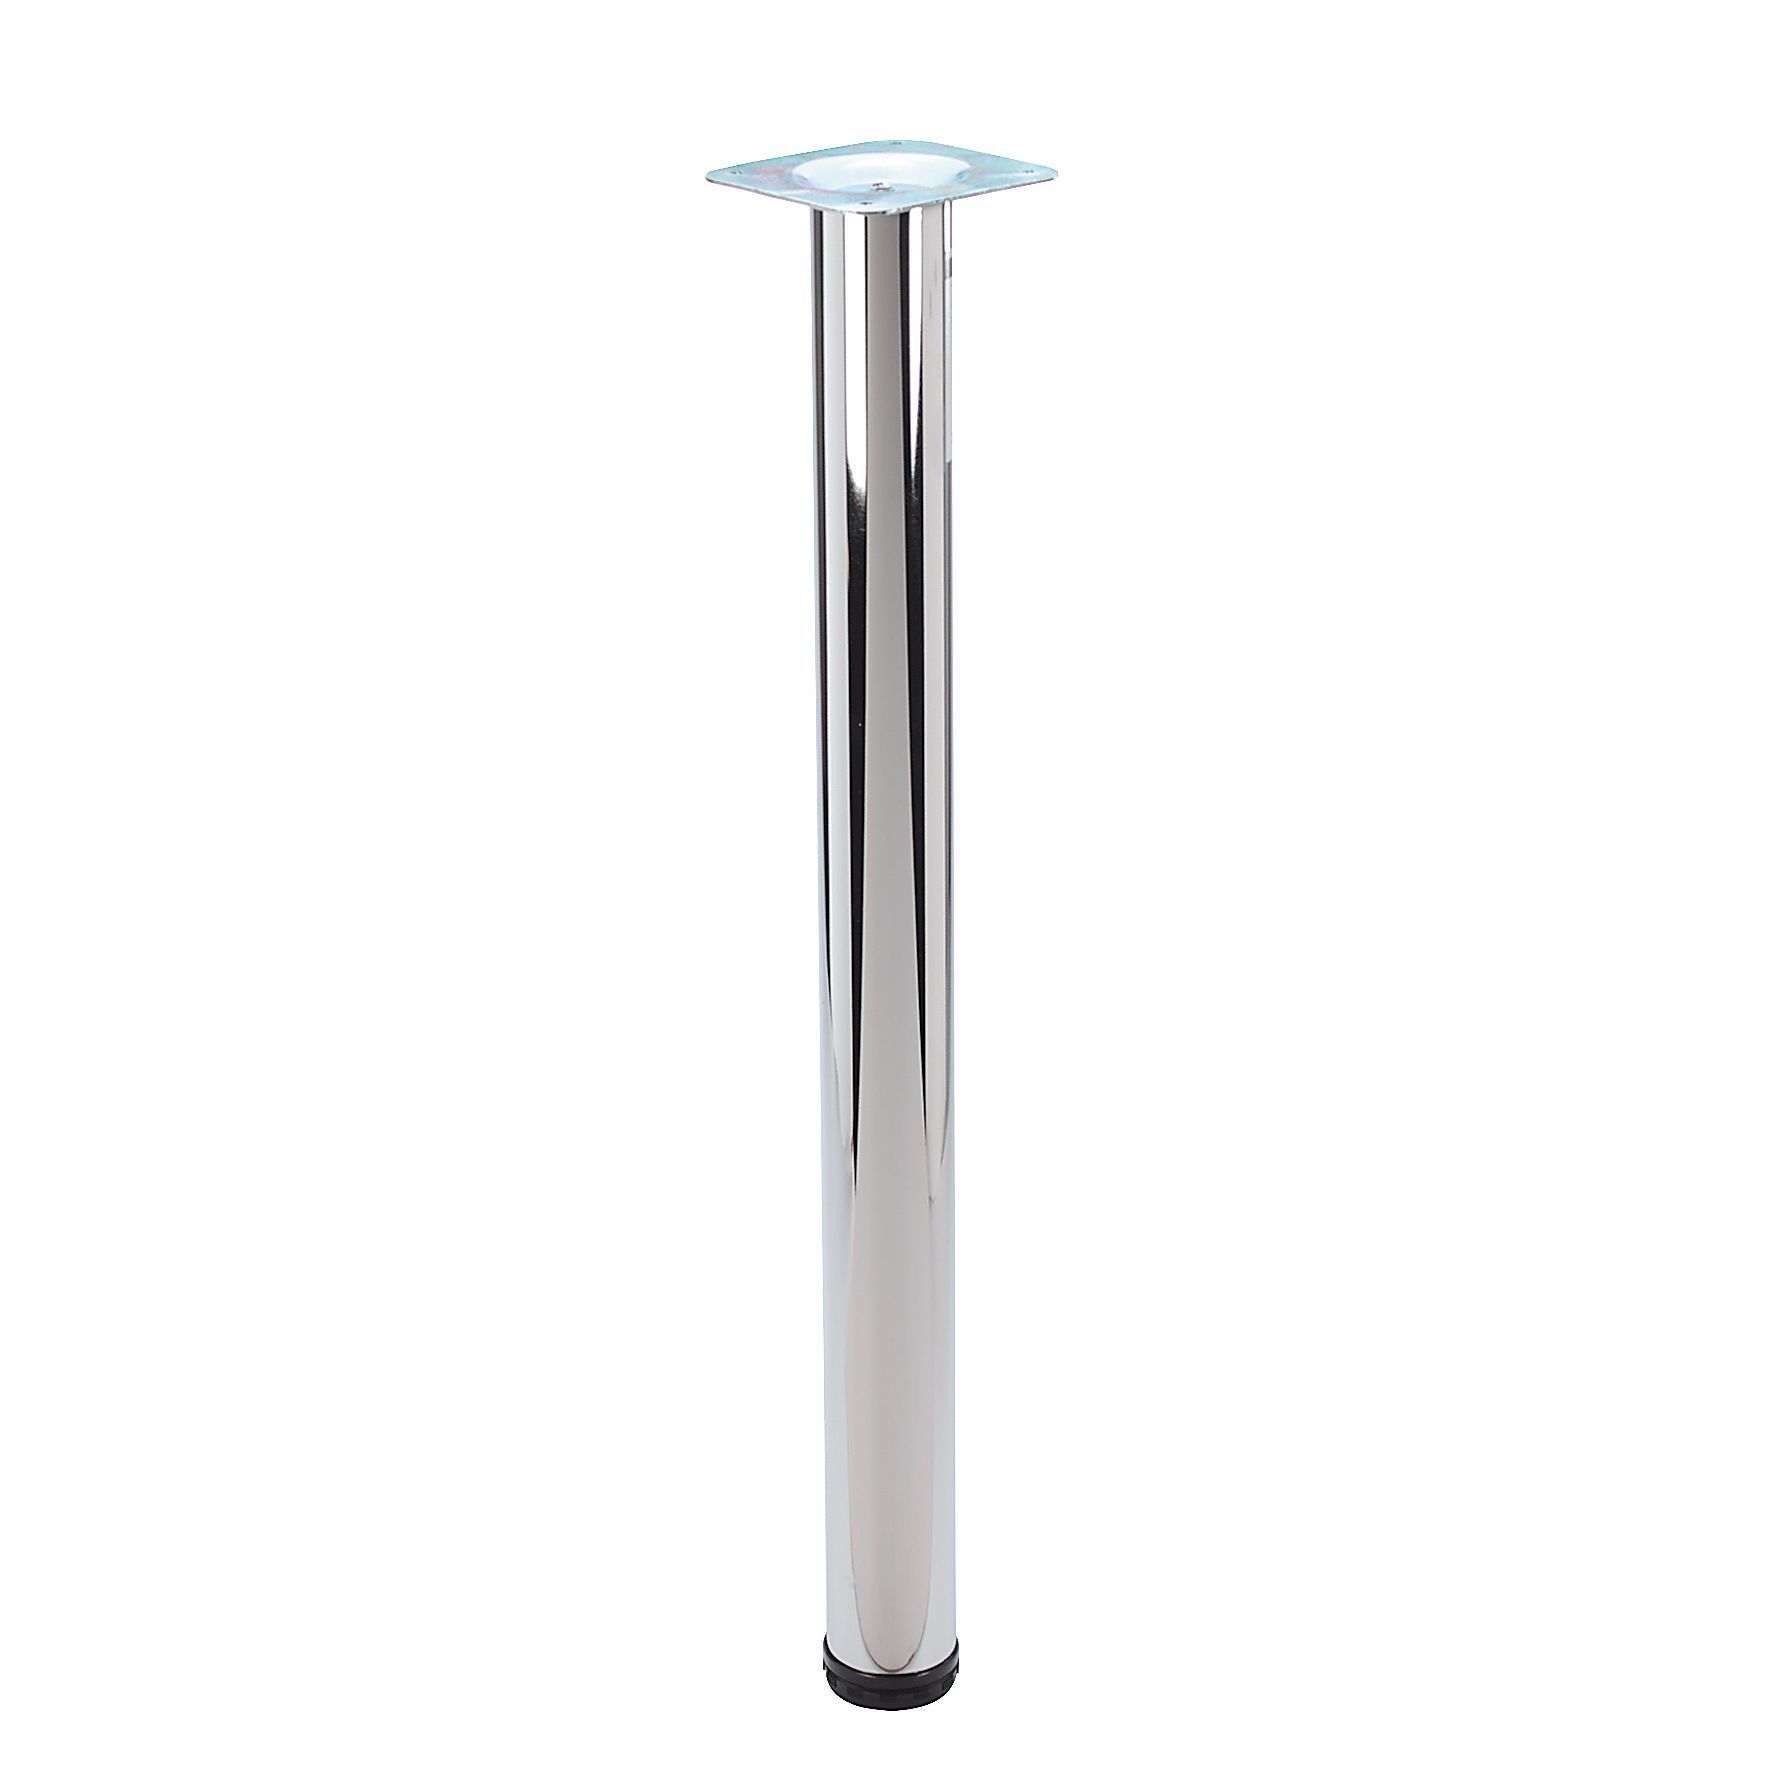 Rothley (H)710mm Chrome-plated Table leg | Departments | DIY at B&Q